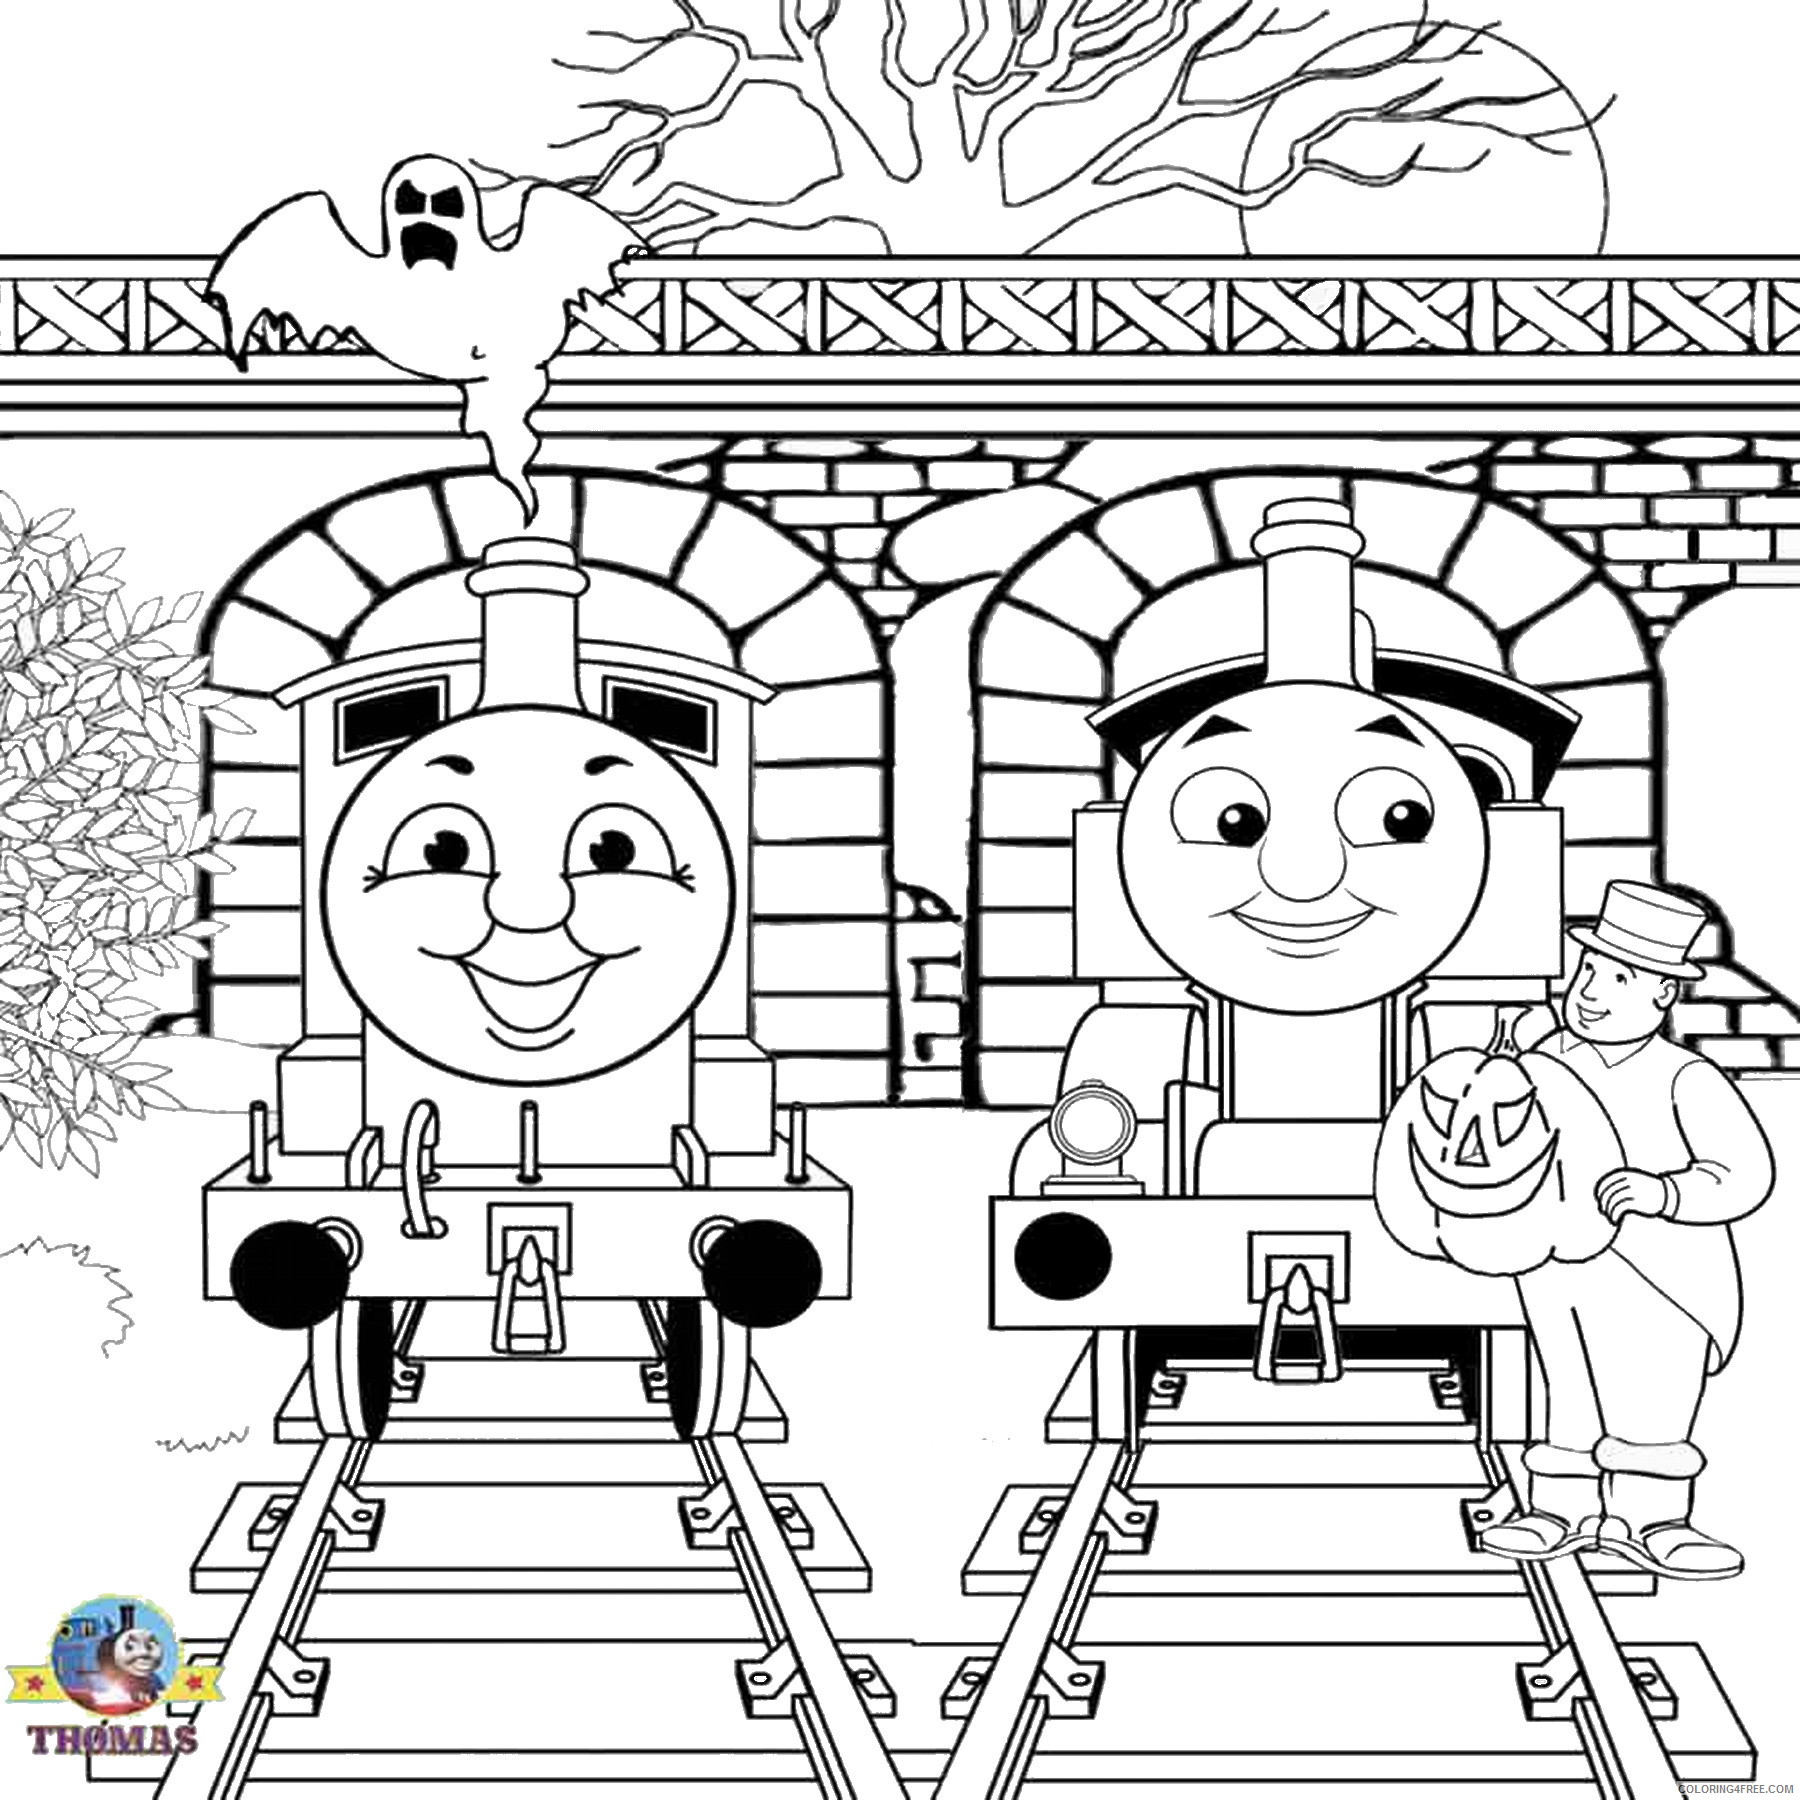 Thomas and Friends Coloring Pages Cartoons thomas_tank_engine_cl23 Printable 2020 6526 Coloring4free